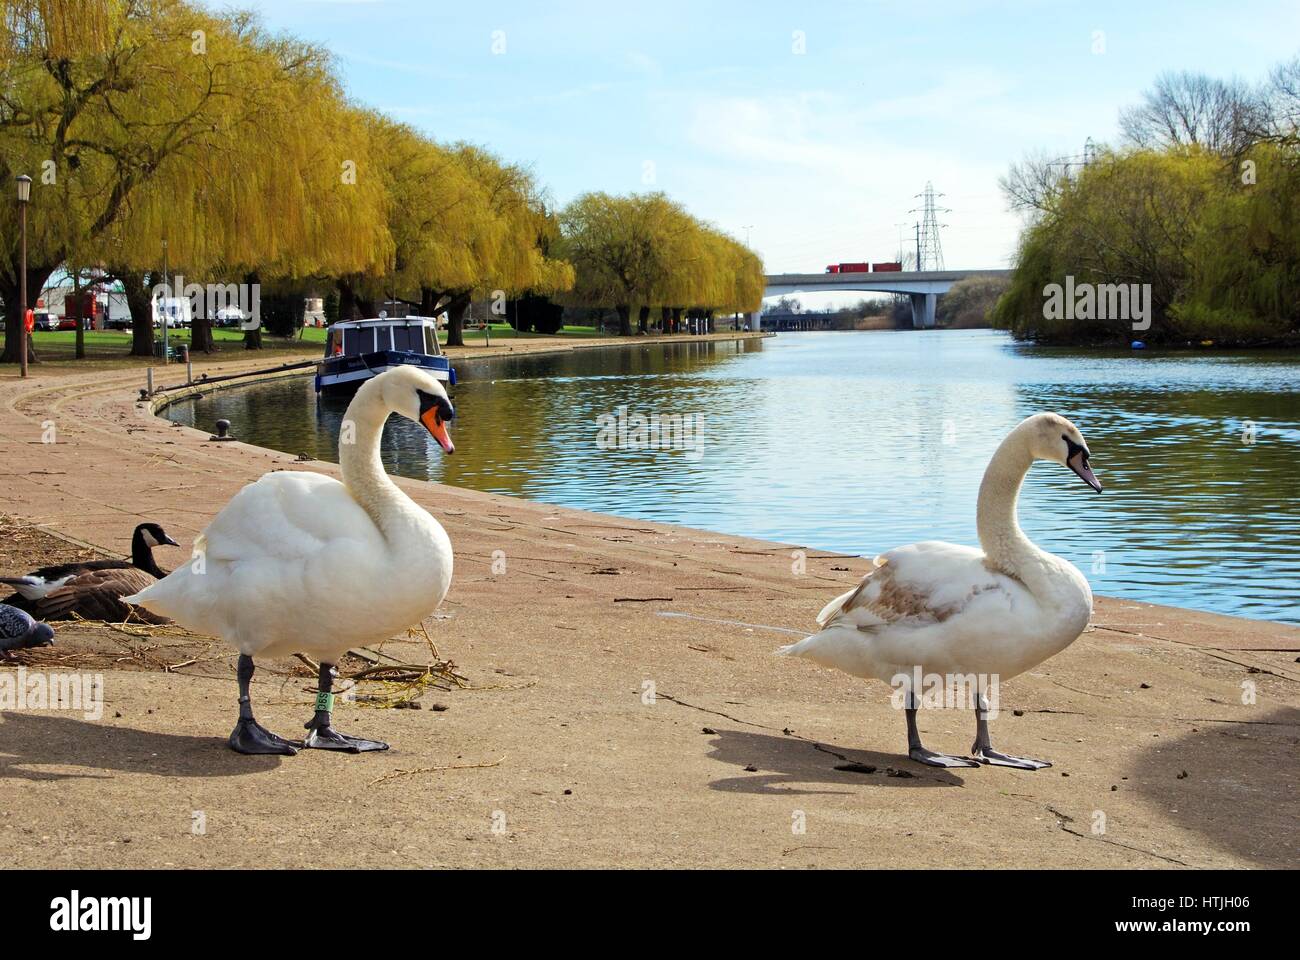 View along the river Nene in the Springtime with mute swans in the foreground, Peterborough, Cambridgeshire, England, UK, Europe. Stock Photo